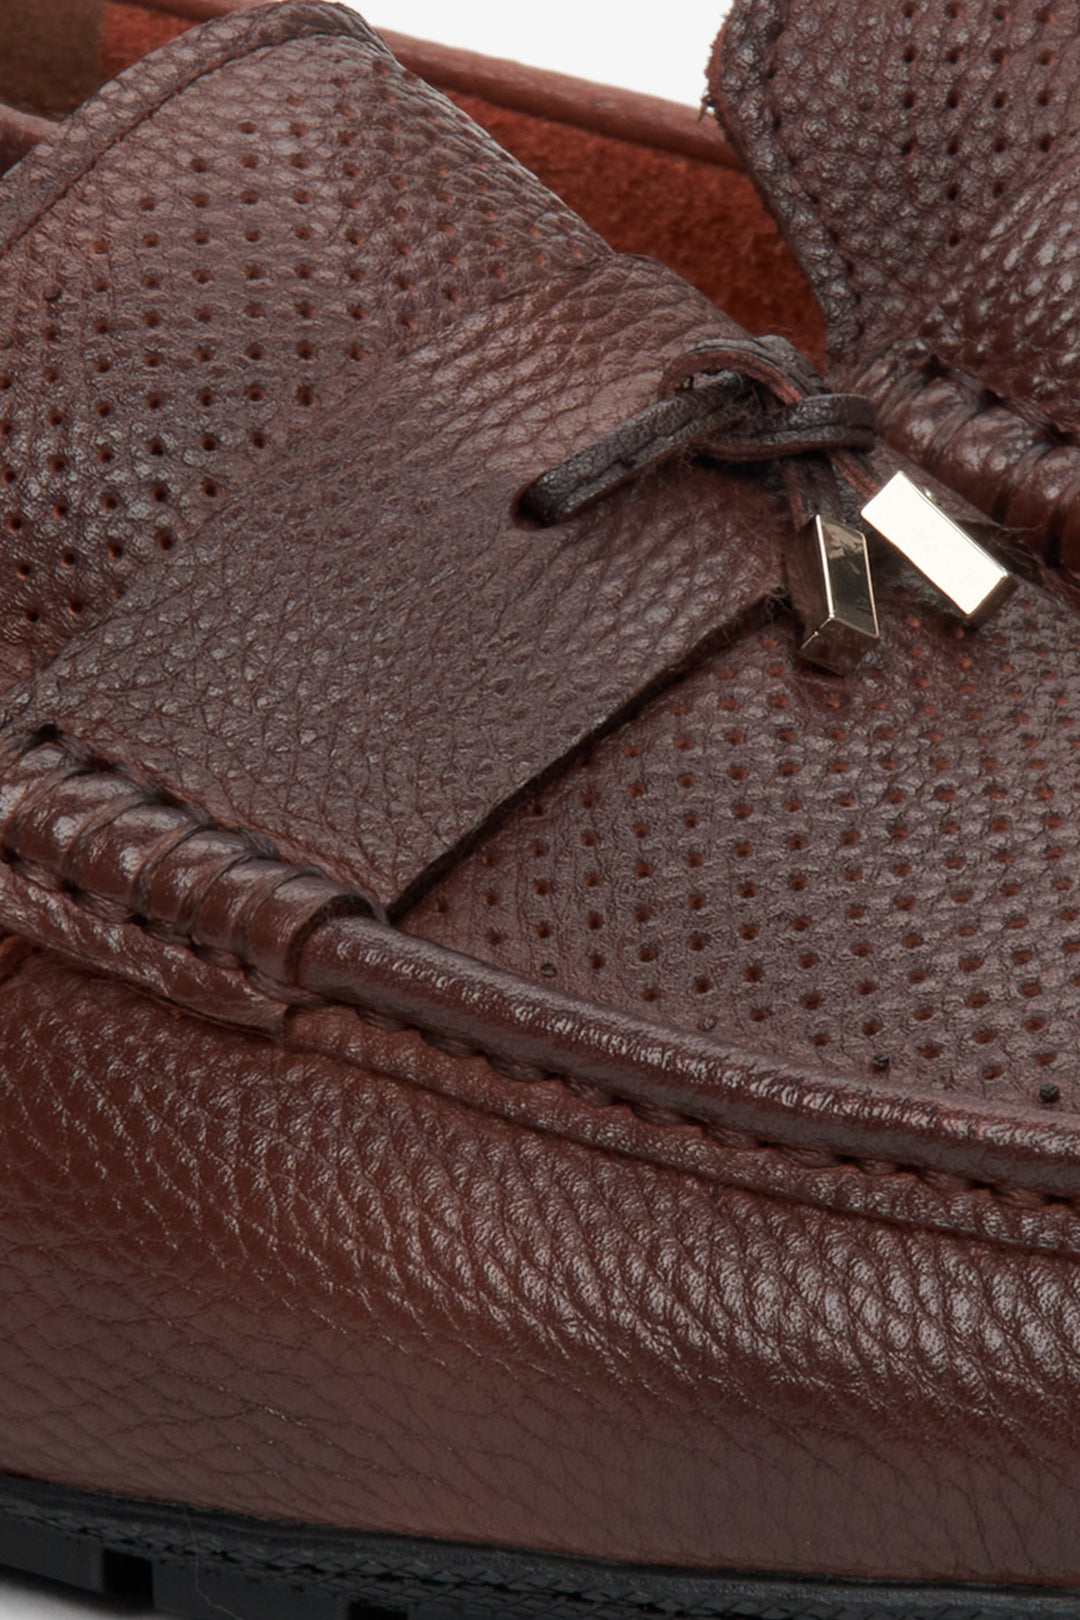 Men's brown leather loafers for fall - close-up on the details.